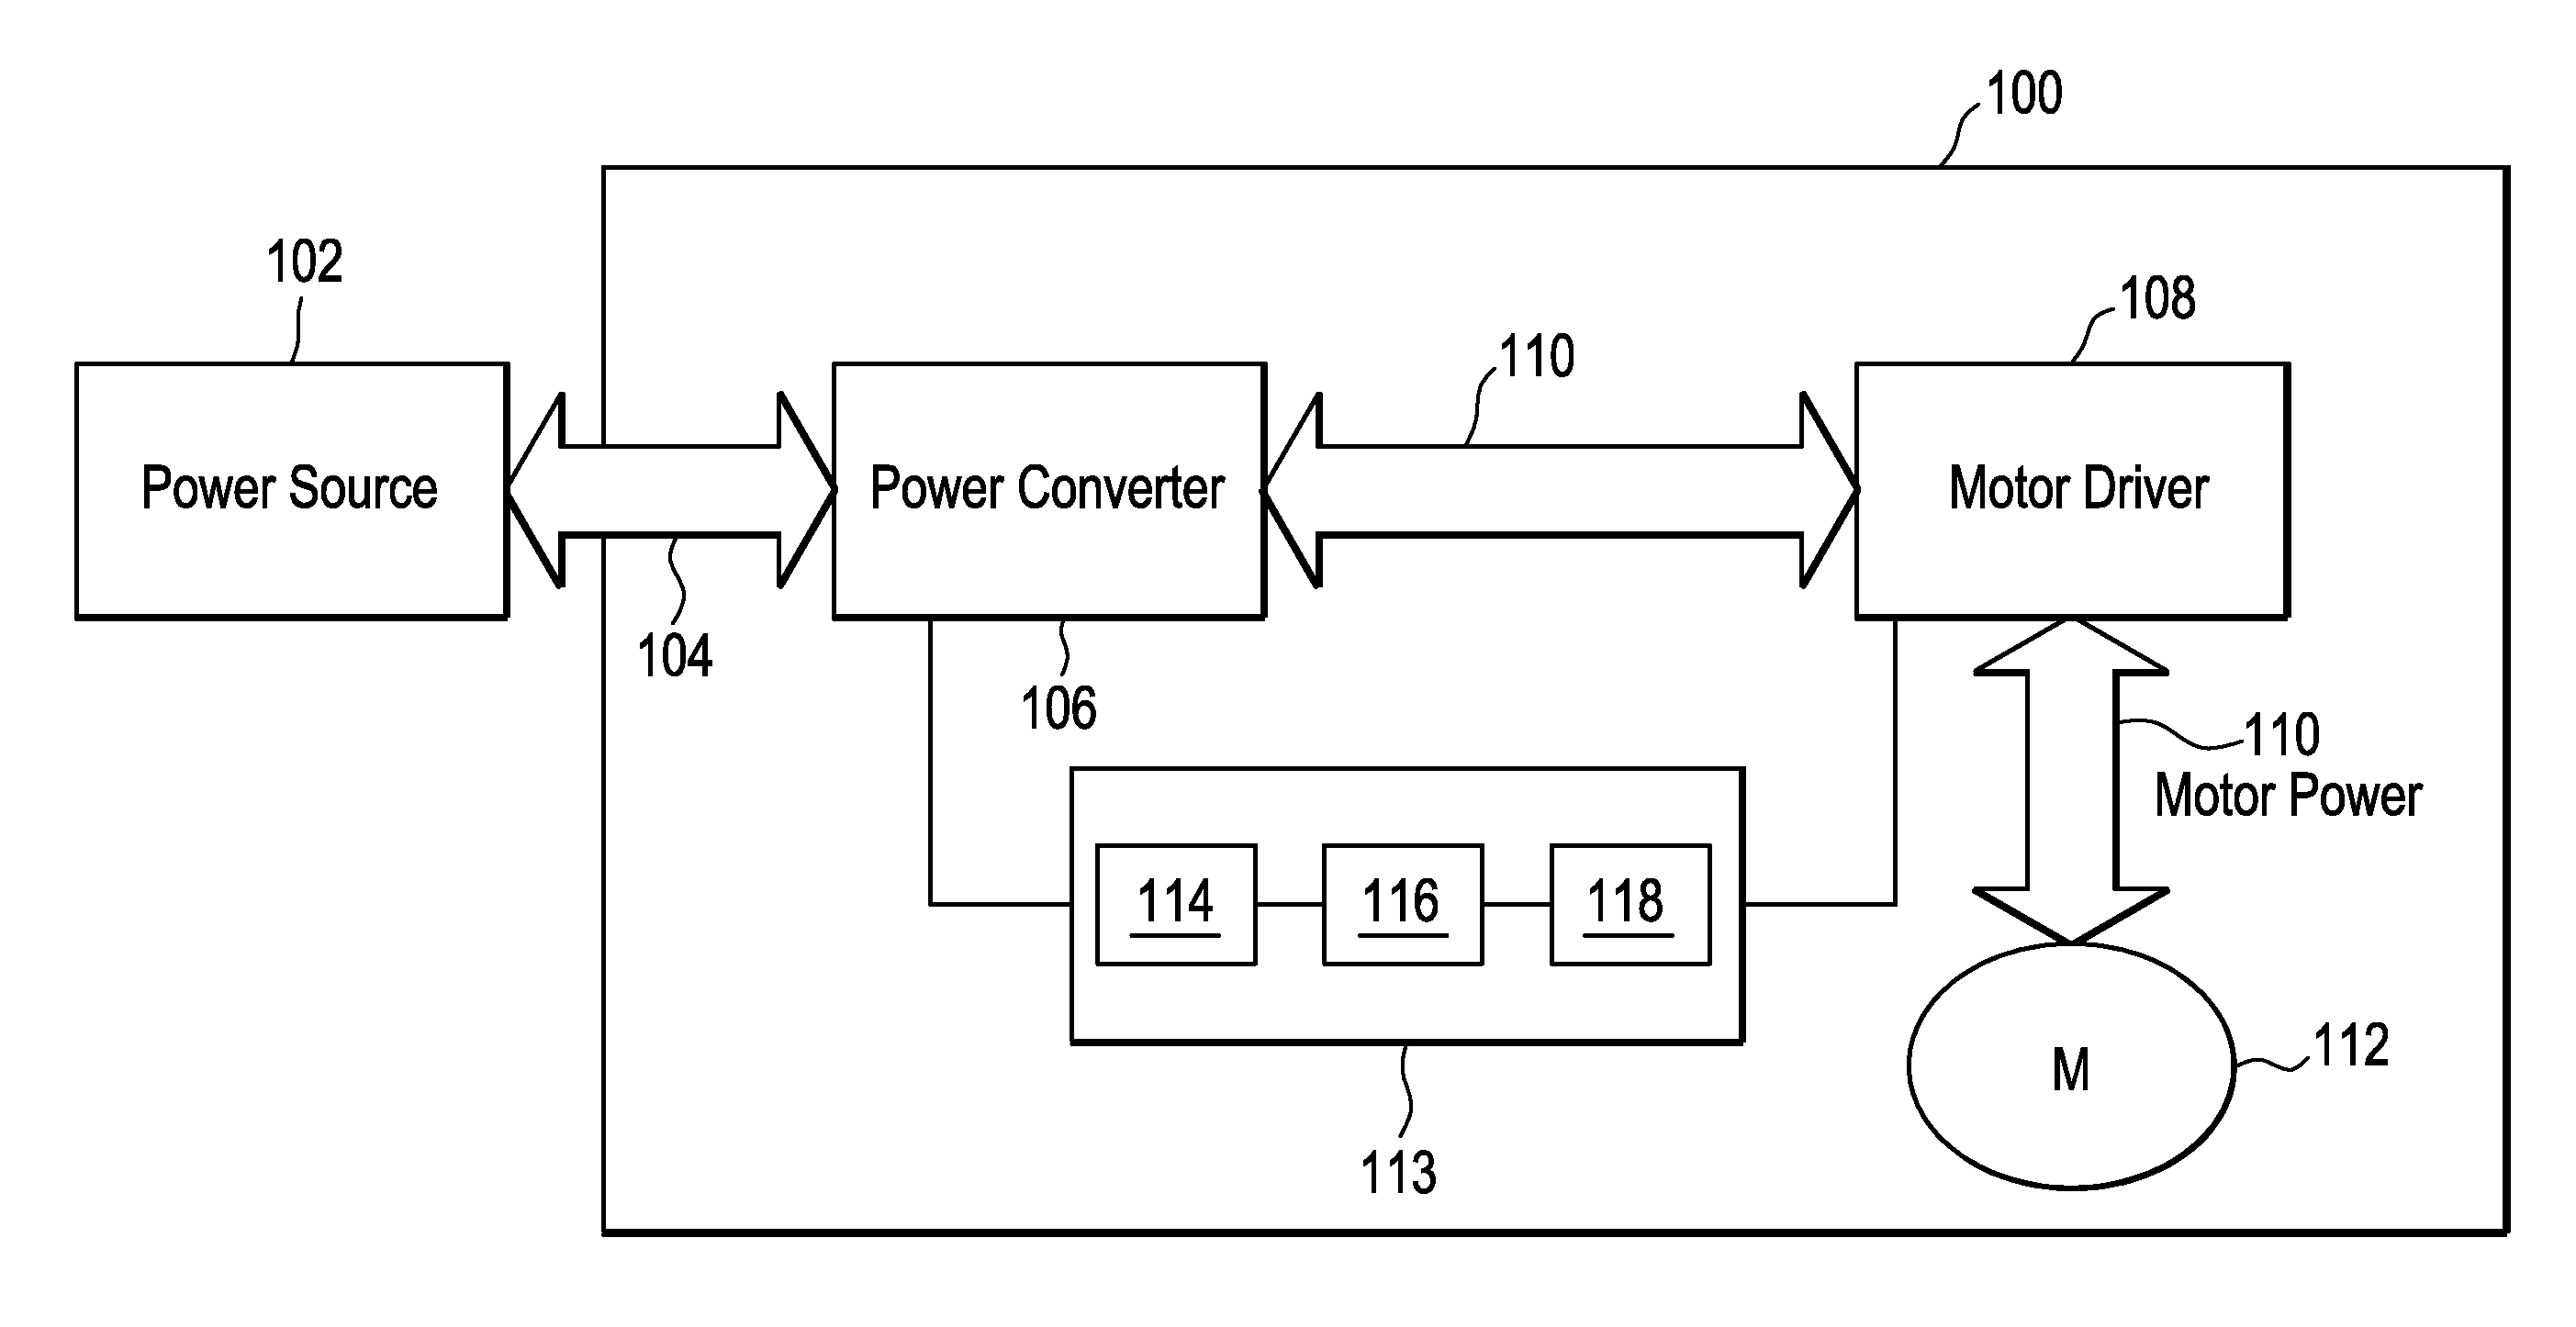 Power control on a multi-motion electric drive system